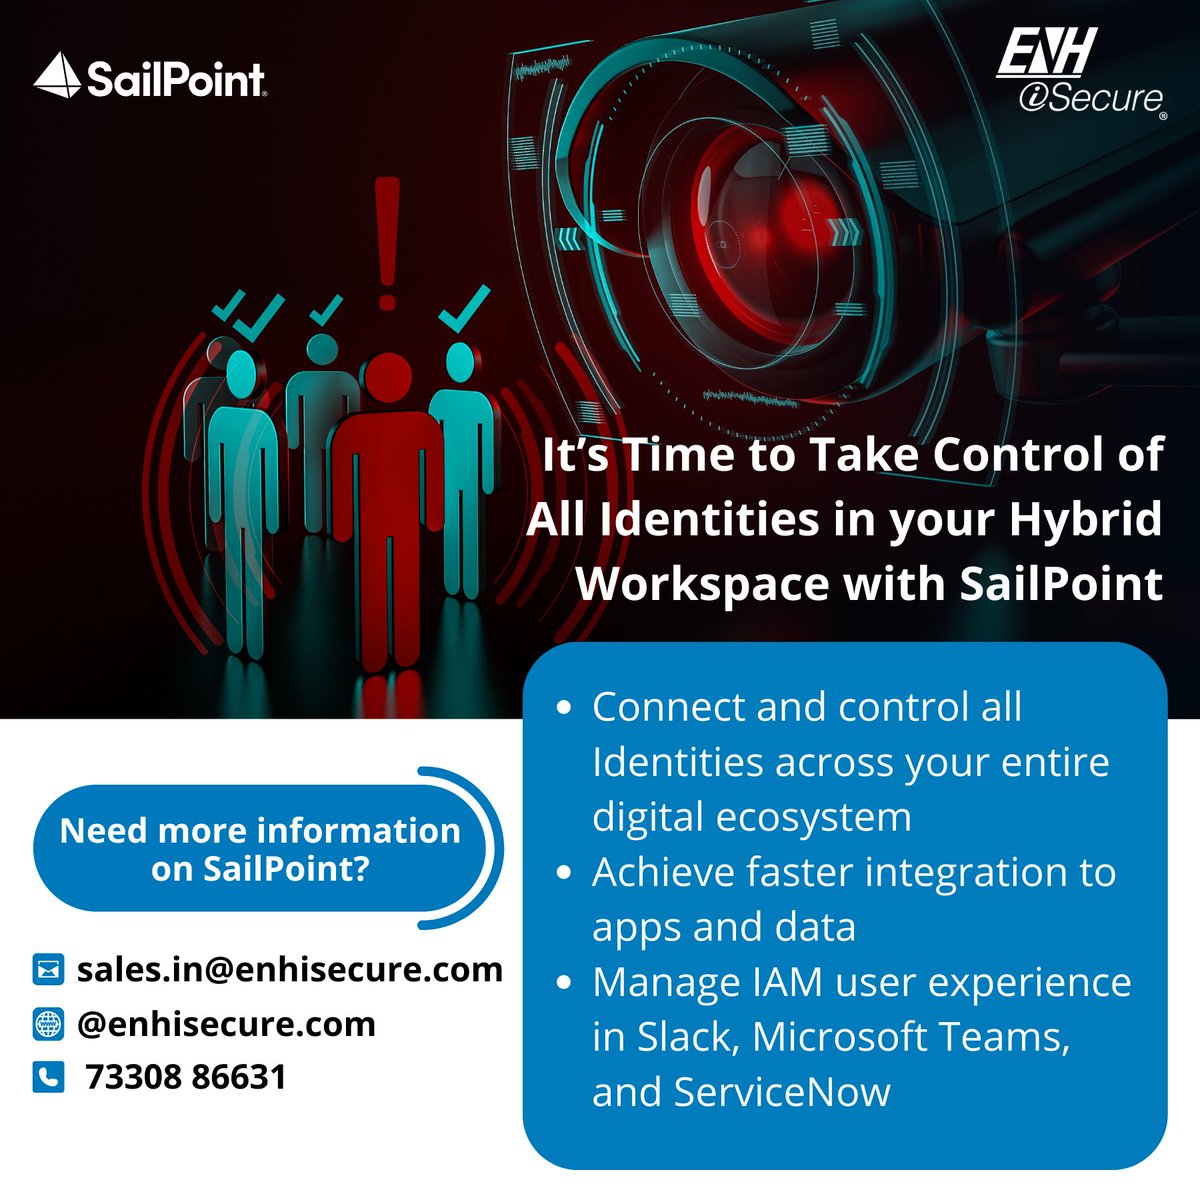 Get visibility and control over your distributed workforce with SailPoint. Leverage the power of unmatched #intelligence and frictionless #automation to gain #identityaccess insights

See how #sailpoint can help you. Email sales.in@enhisecure.com for an overview

#hybridworkforce